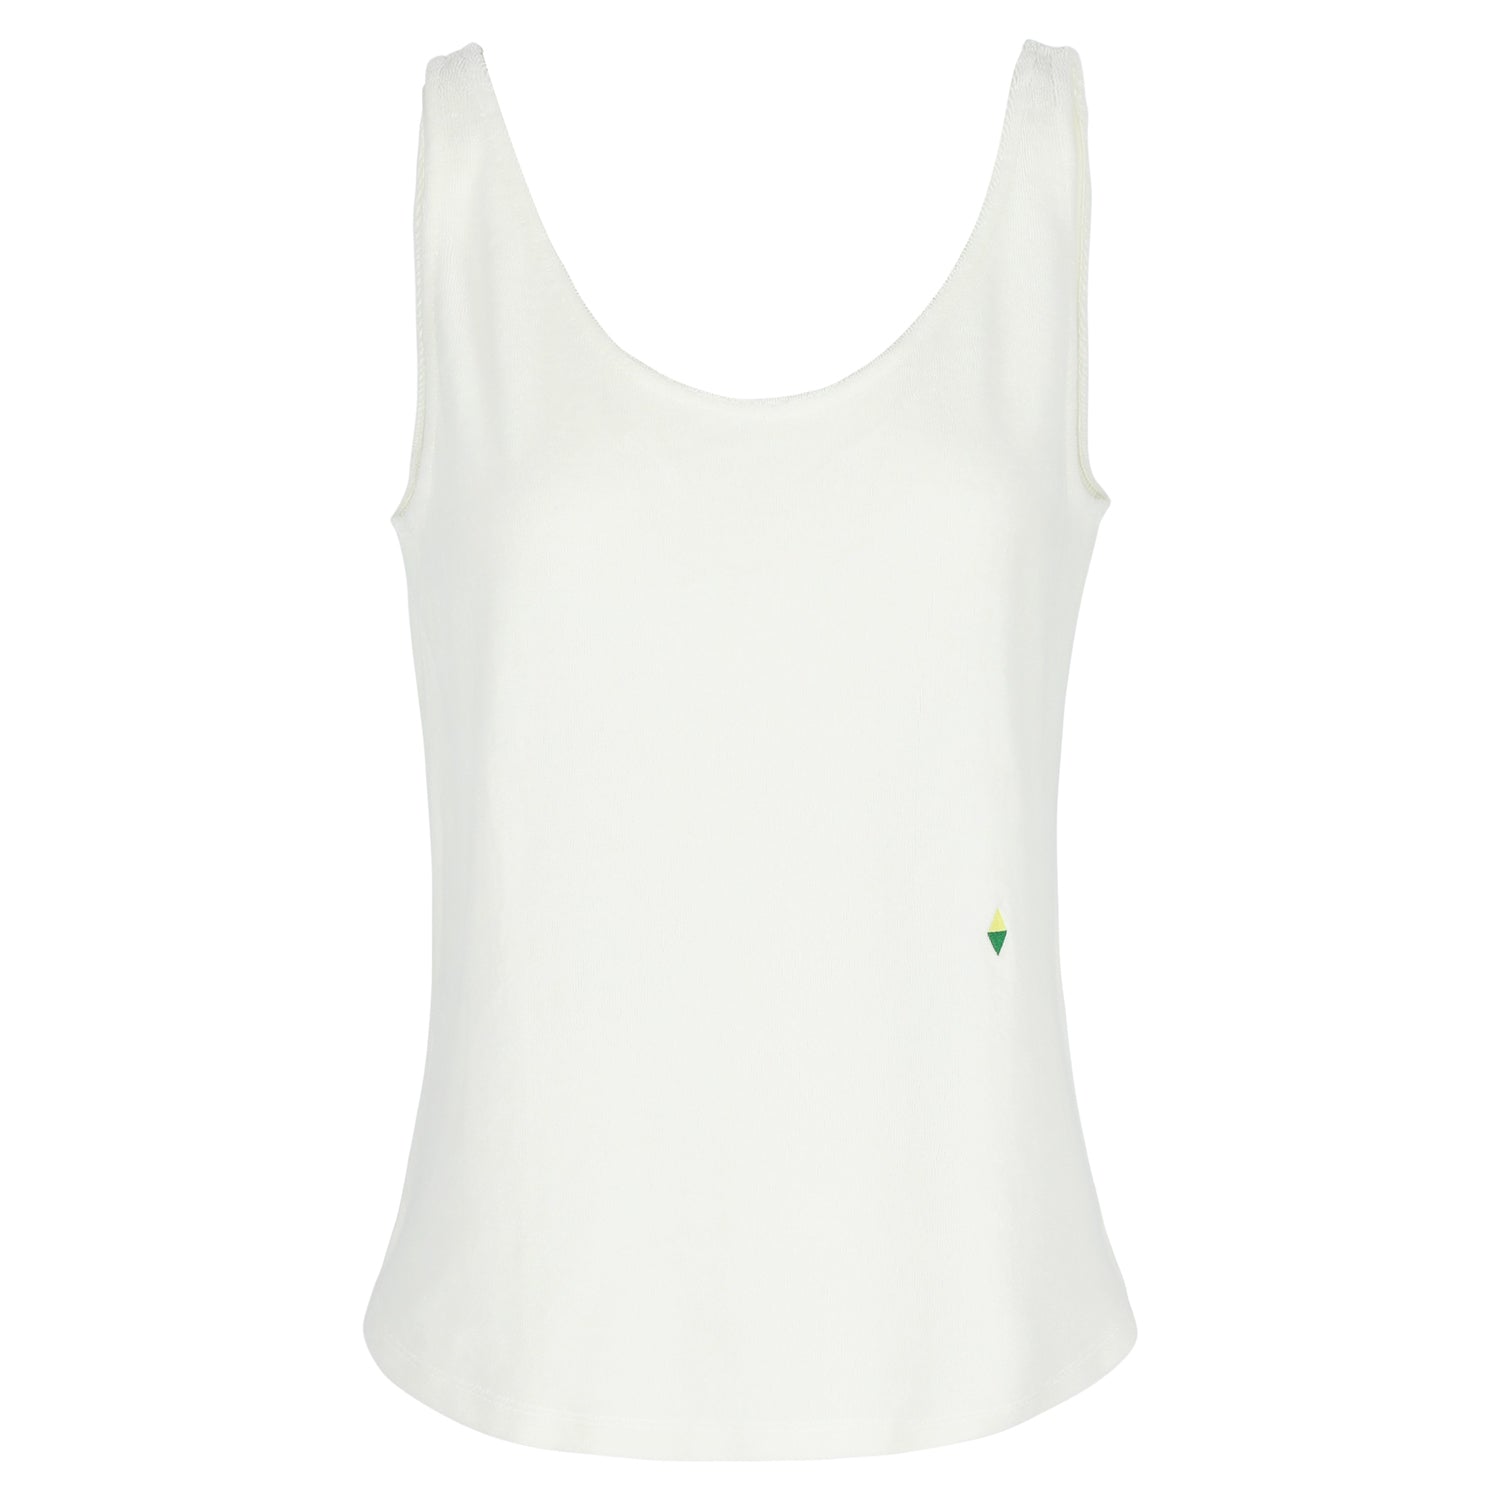 Lie Terry Towelling Top White